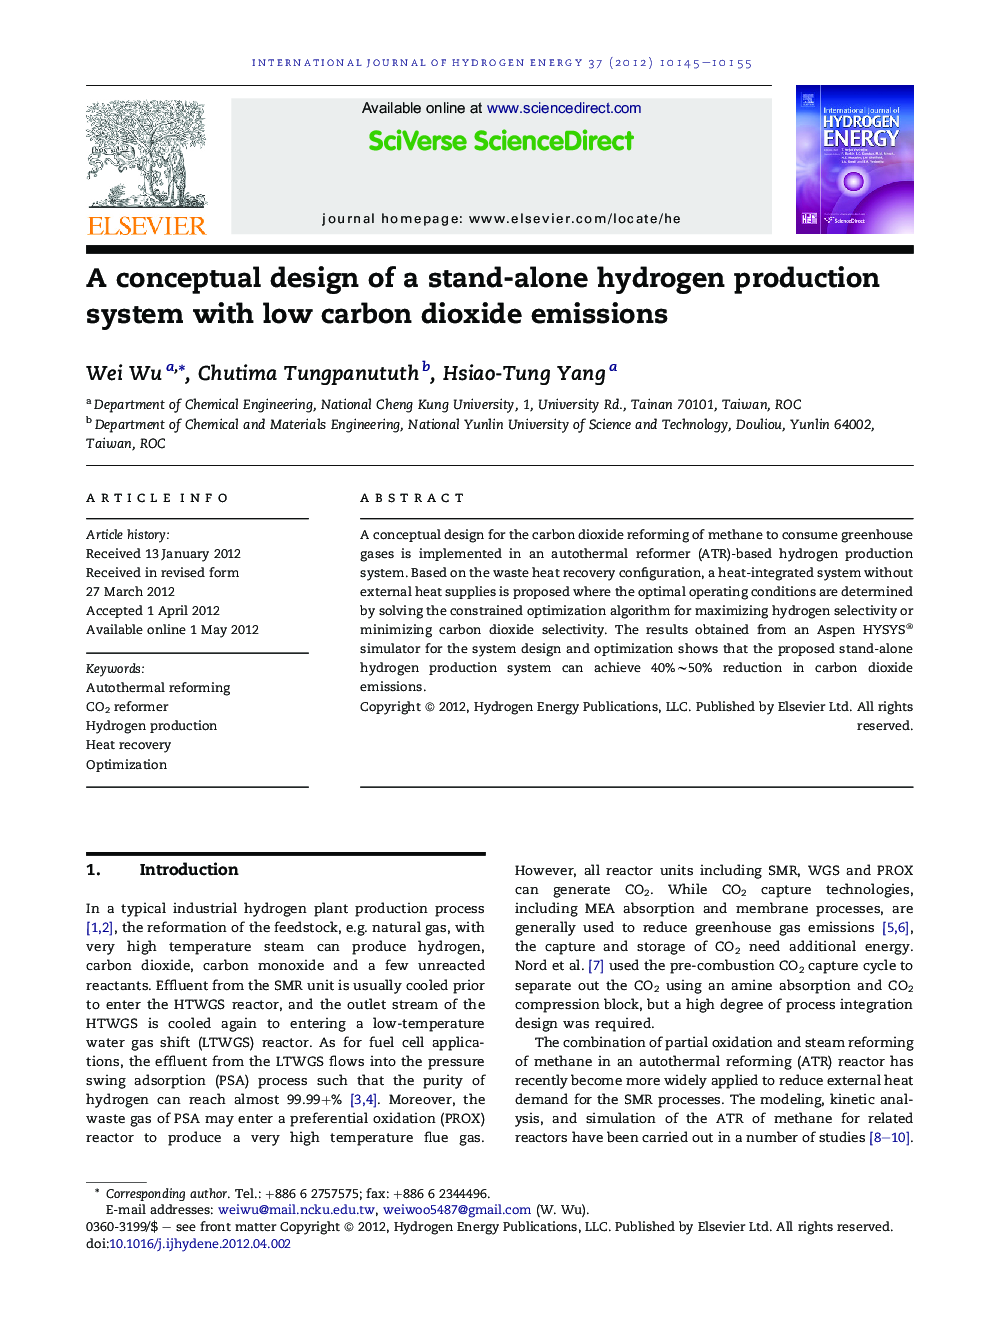 A conceptual design of a stand-alone hydrogen production system with low carbon dioxide emissions